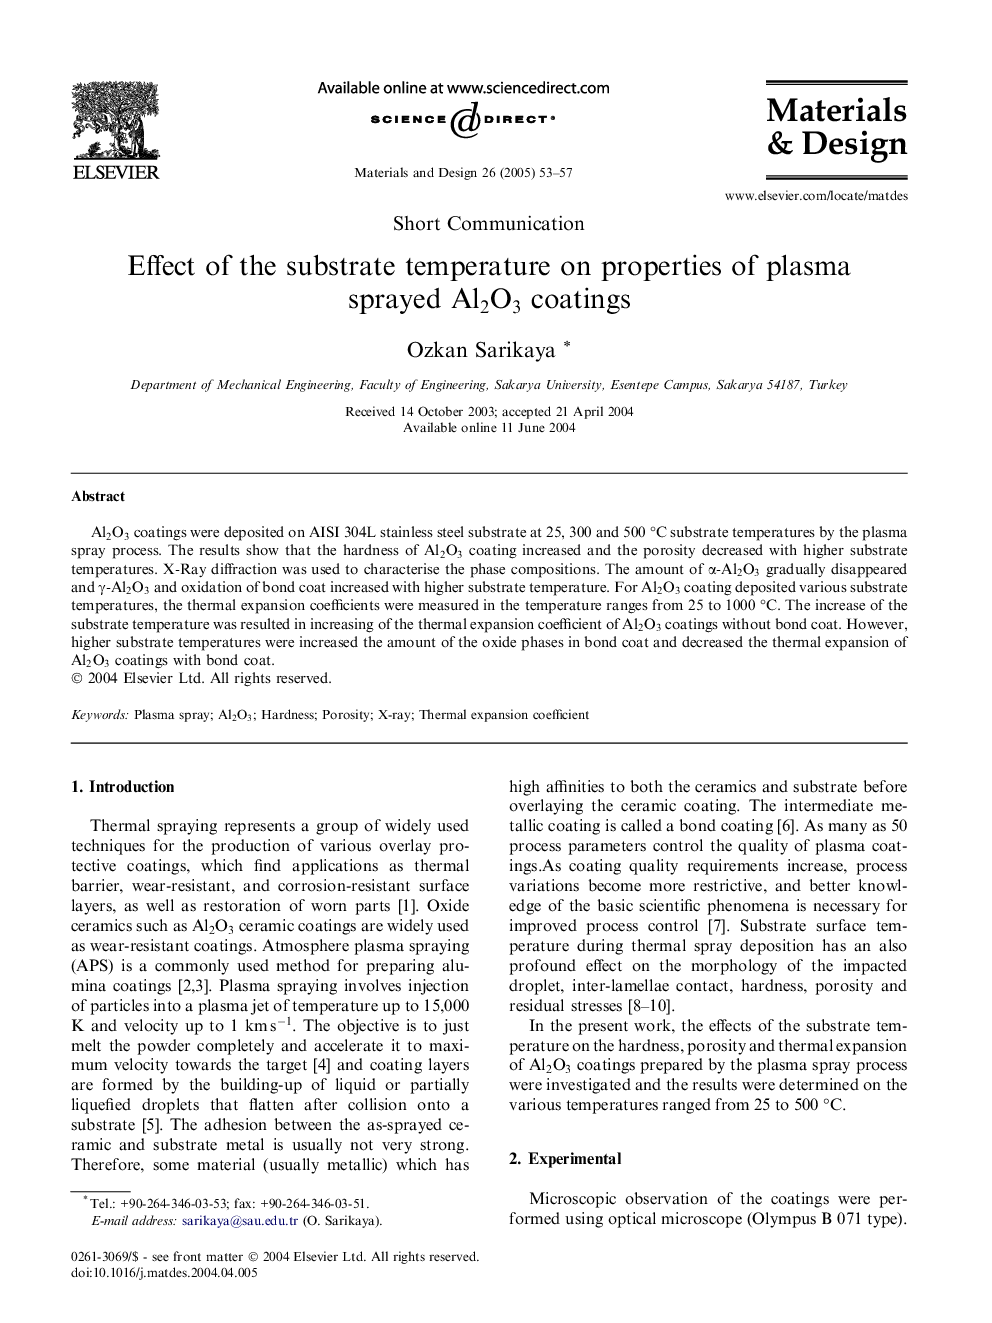 Effect of the substrate temperature on properties of plasma sprayed Al2O3 coatings